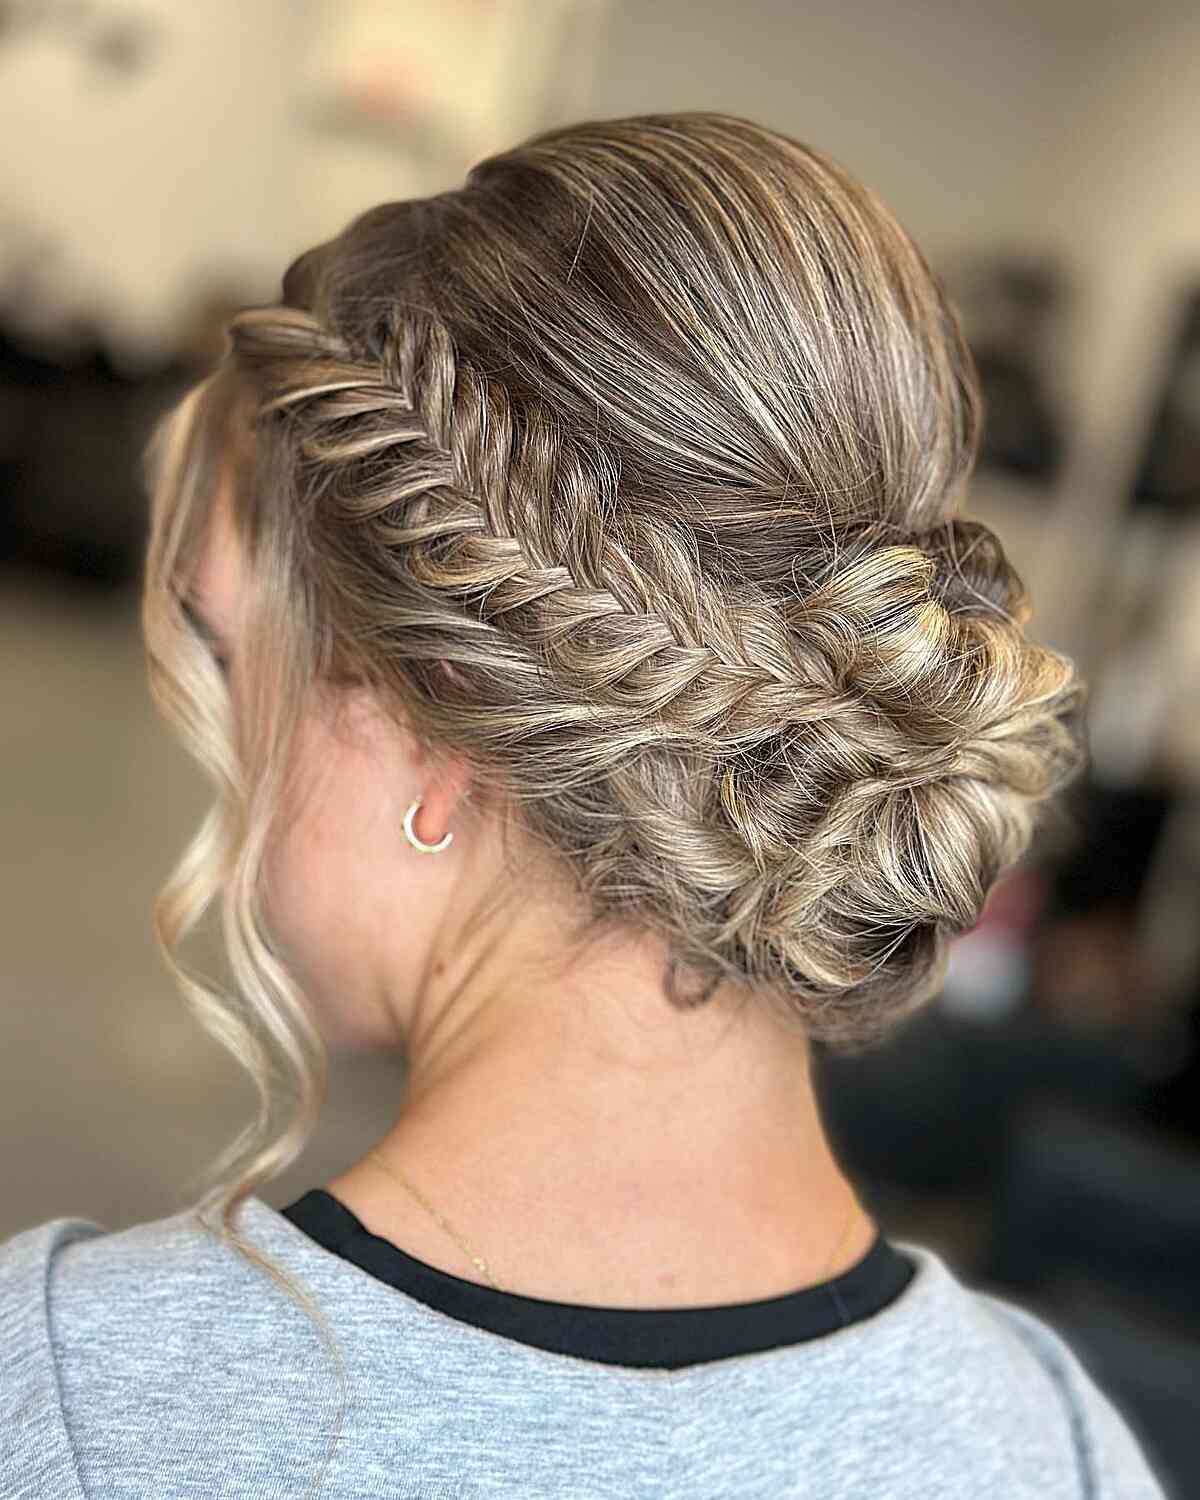 Romantic Braid Hairstyles for the Prom